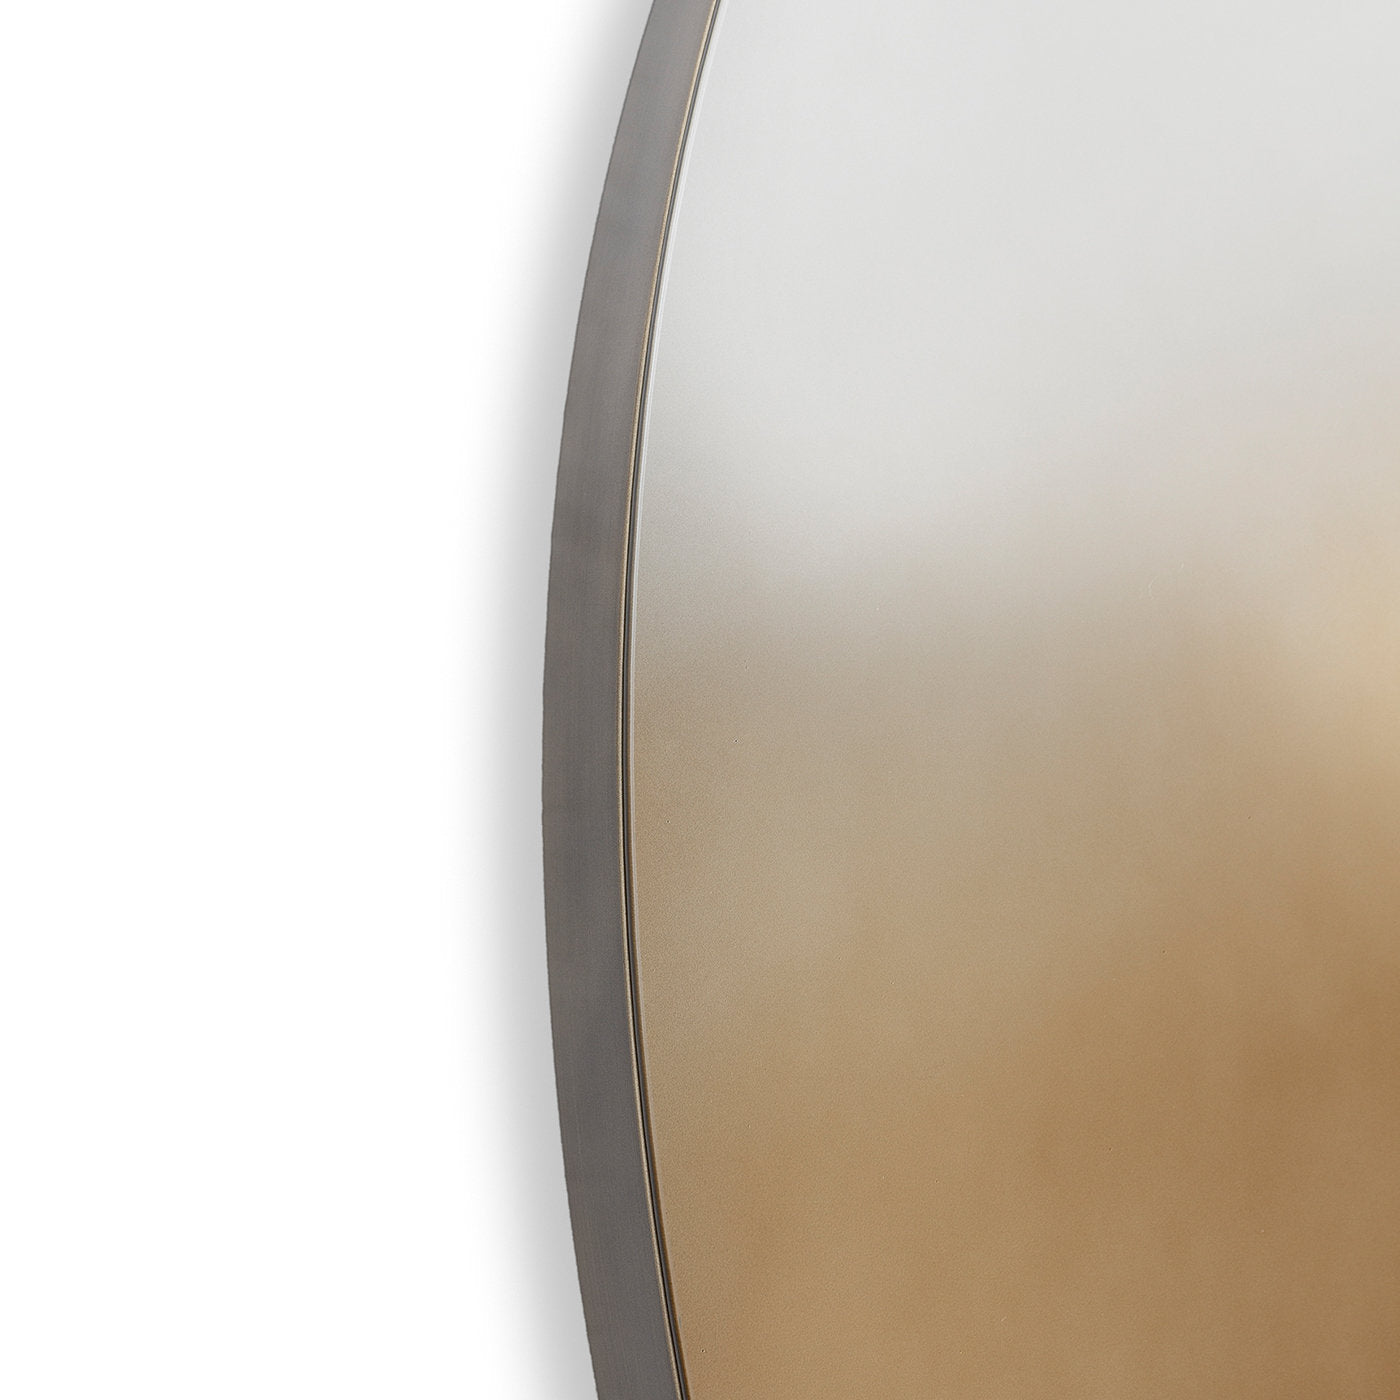 Duo Oval Mirror in Teal and Beige - Alternative view 1